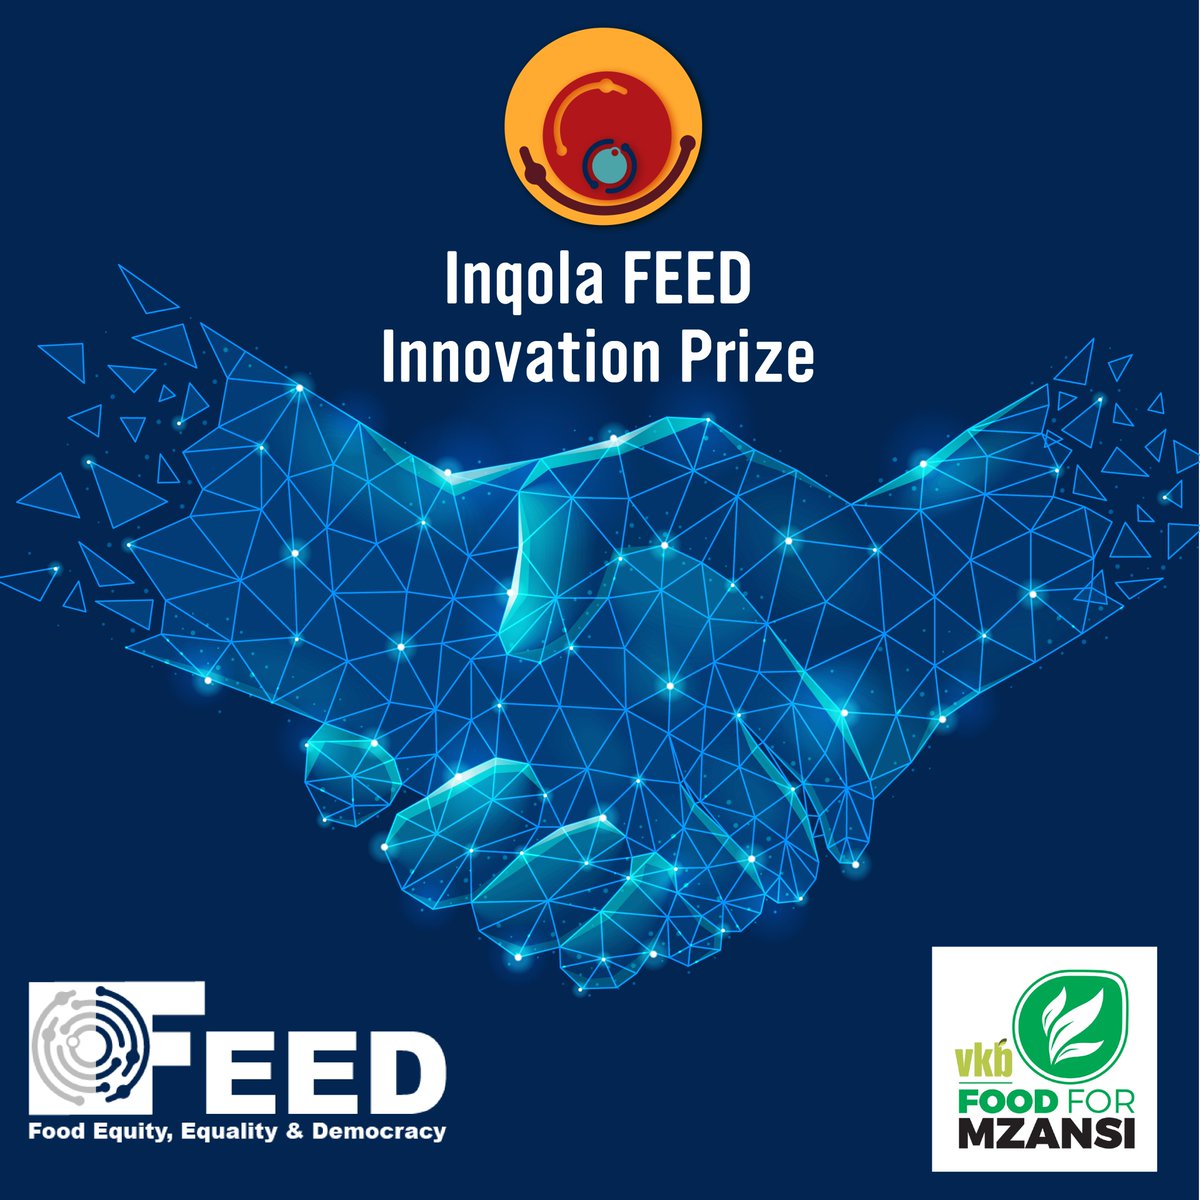 Partnerships and collaborations are instrumental to the success of what FEED seeks to do: we are proud to announce that Food For Mzansi has partnered with FEED for the Inqola FEED Innovation Prize. 

#Foodsystems #Inqola #InqolaPrize #Innovationprize #Techcompetition #initiative